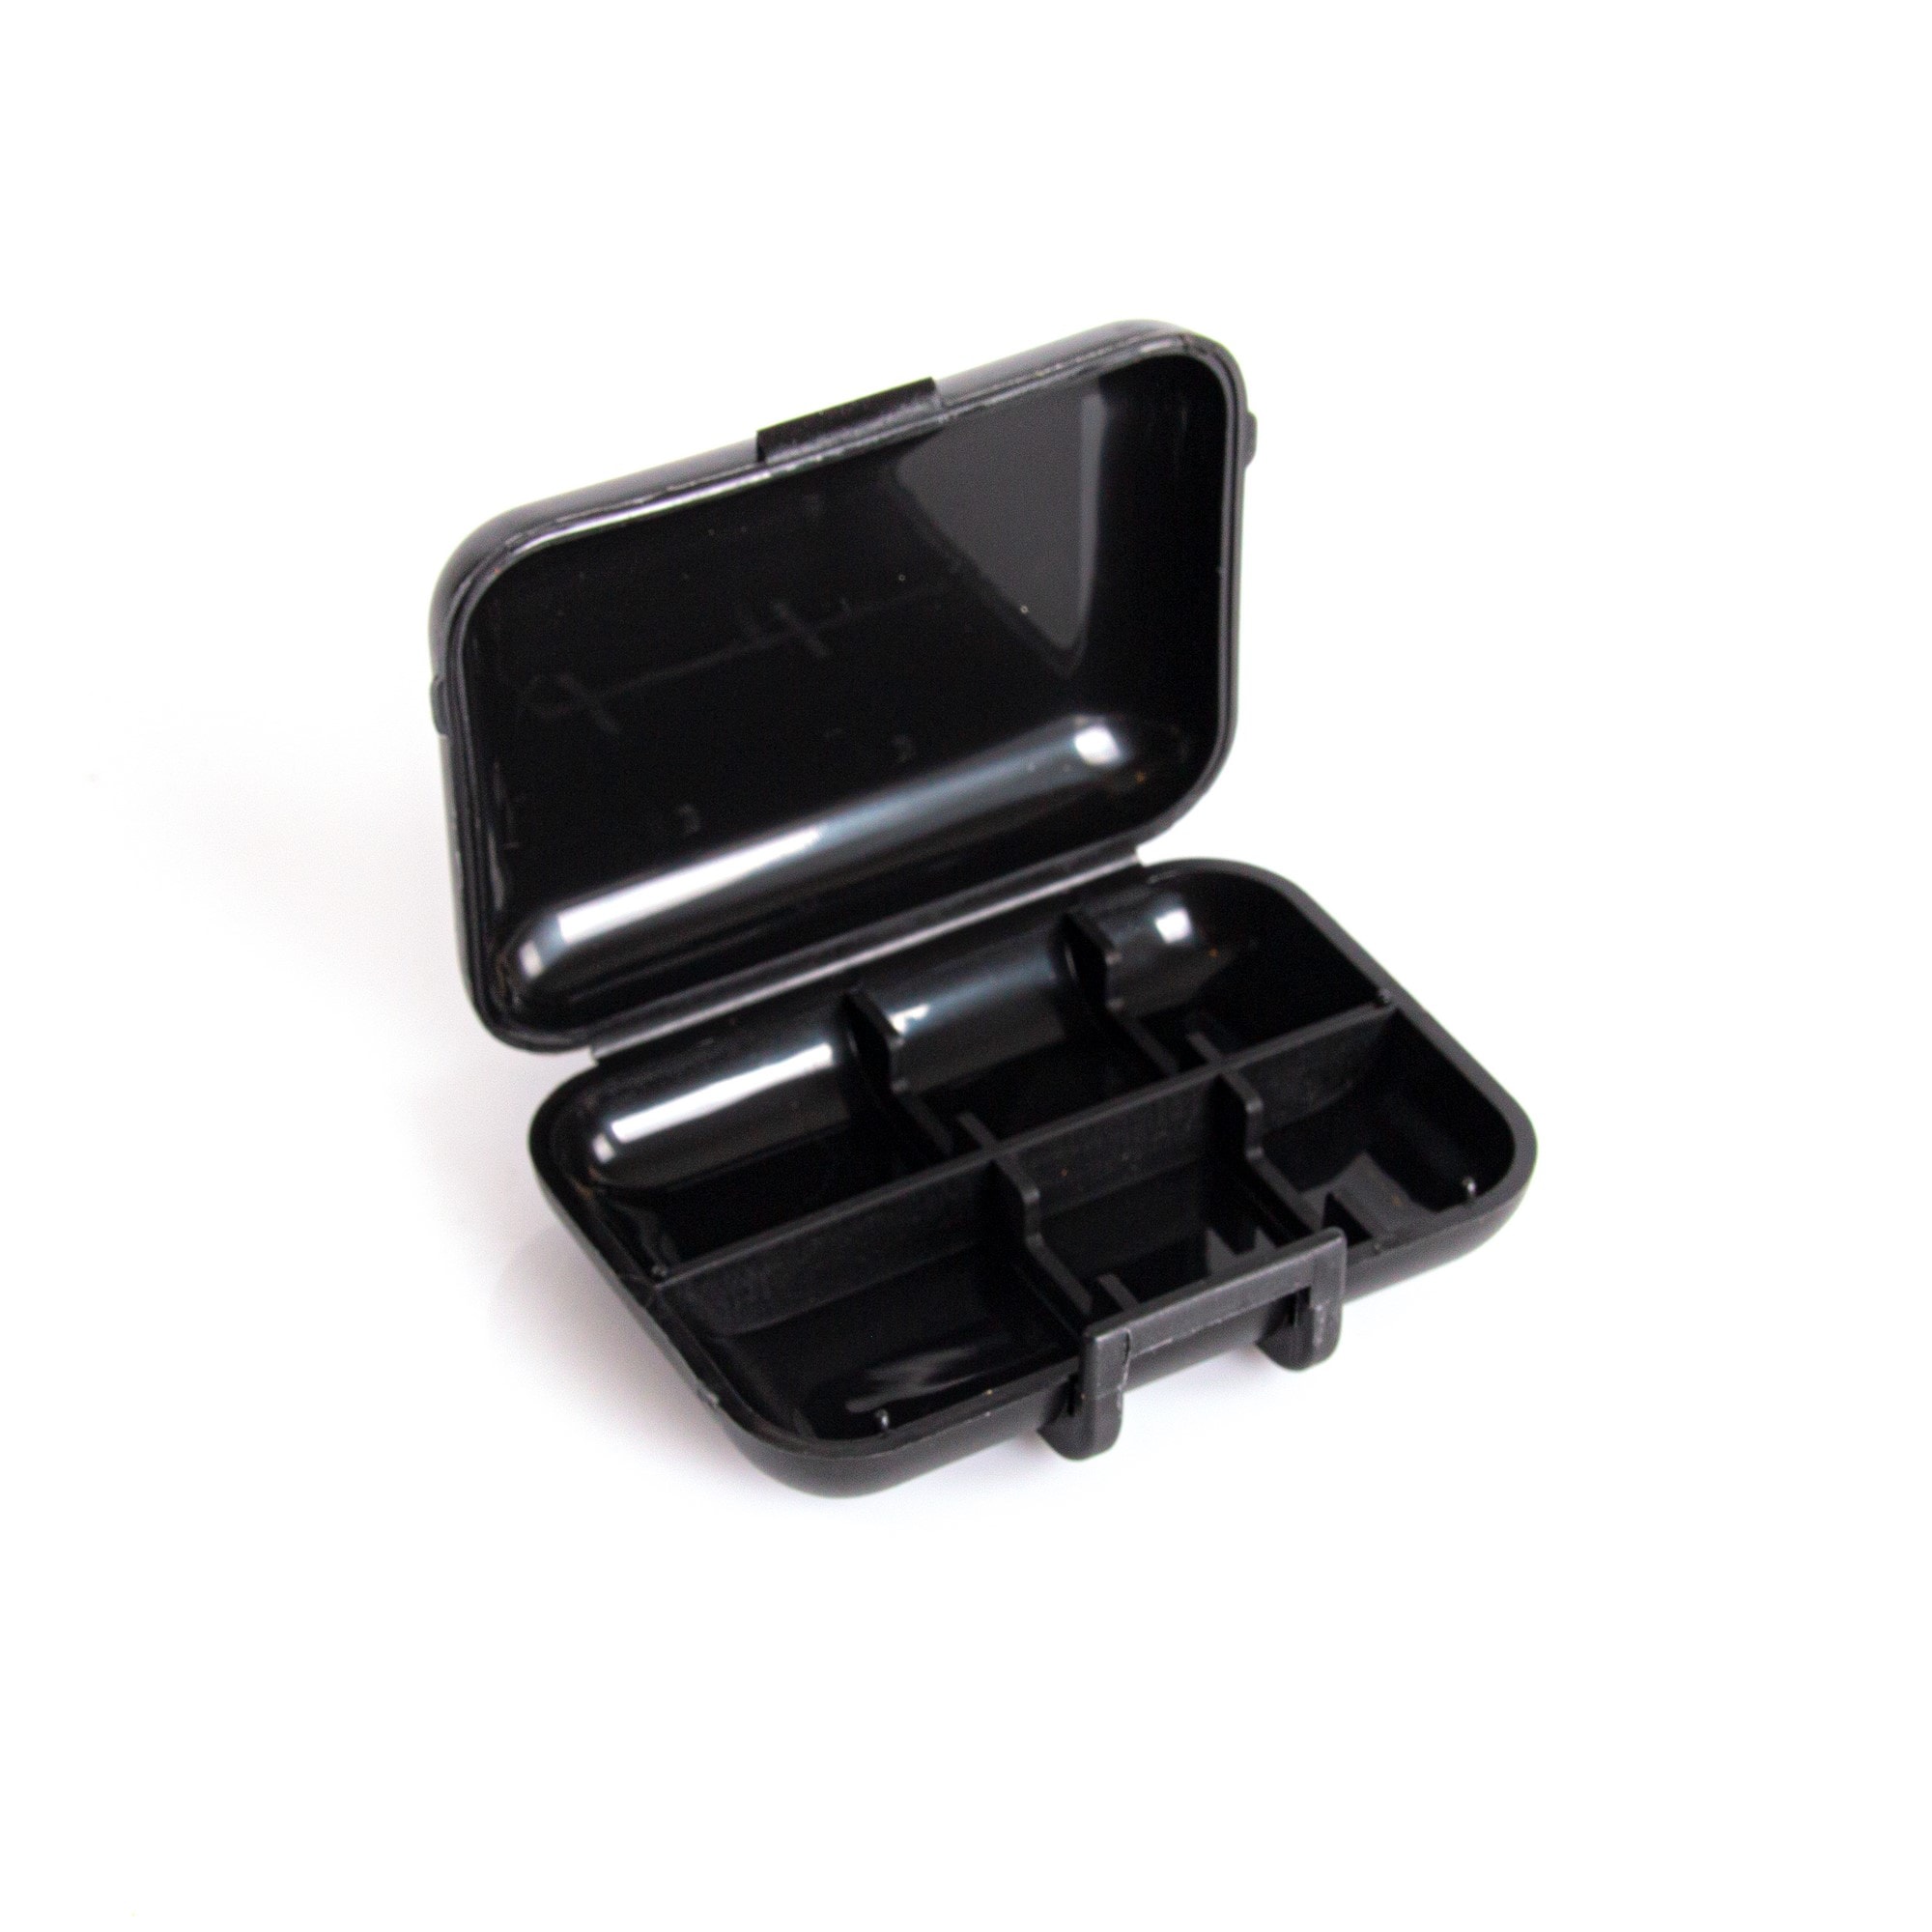 Storage box for two spark plugs